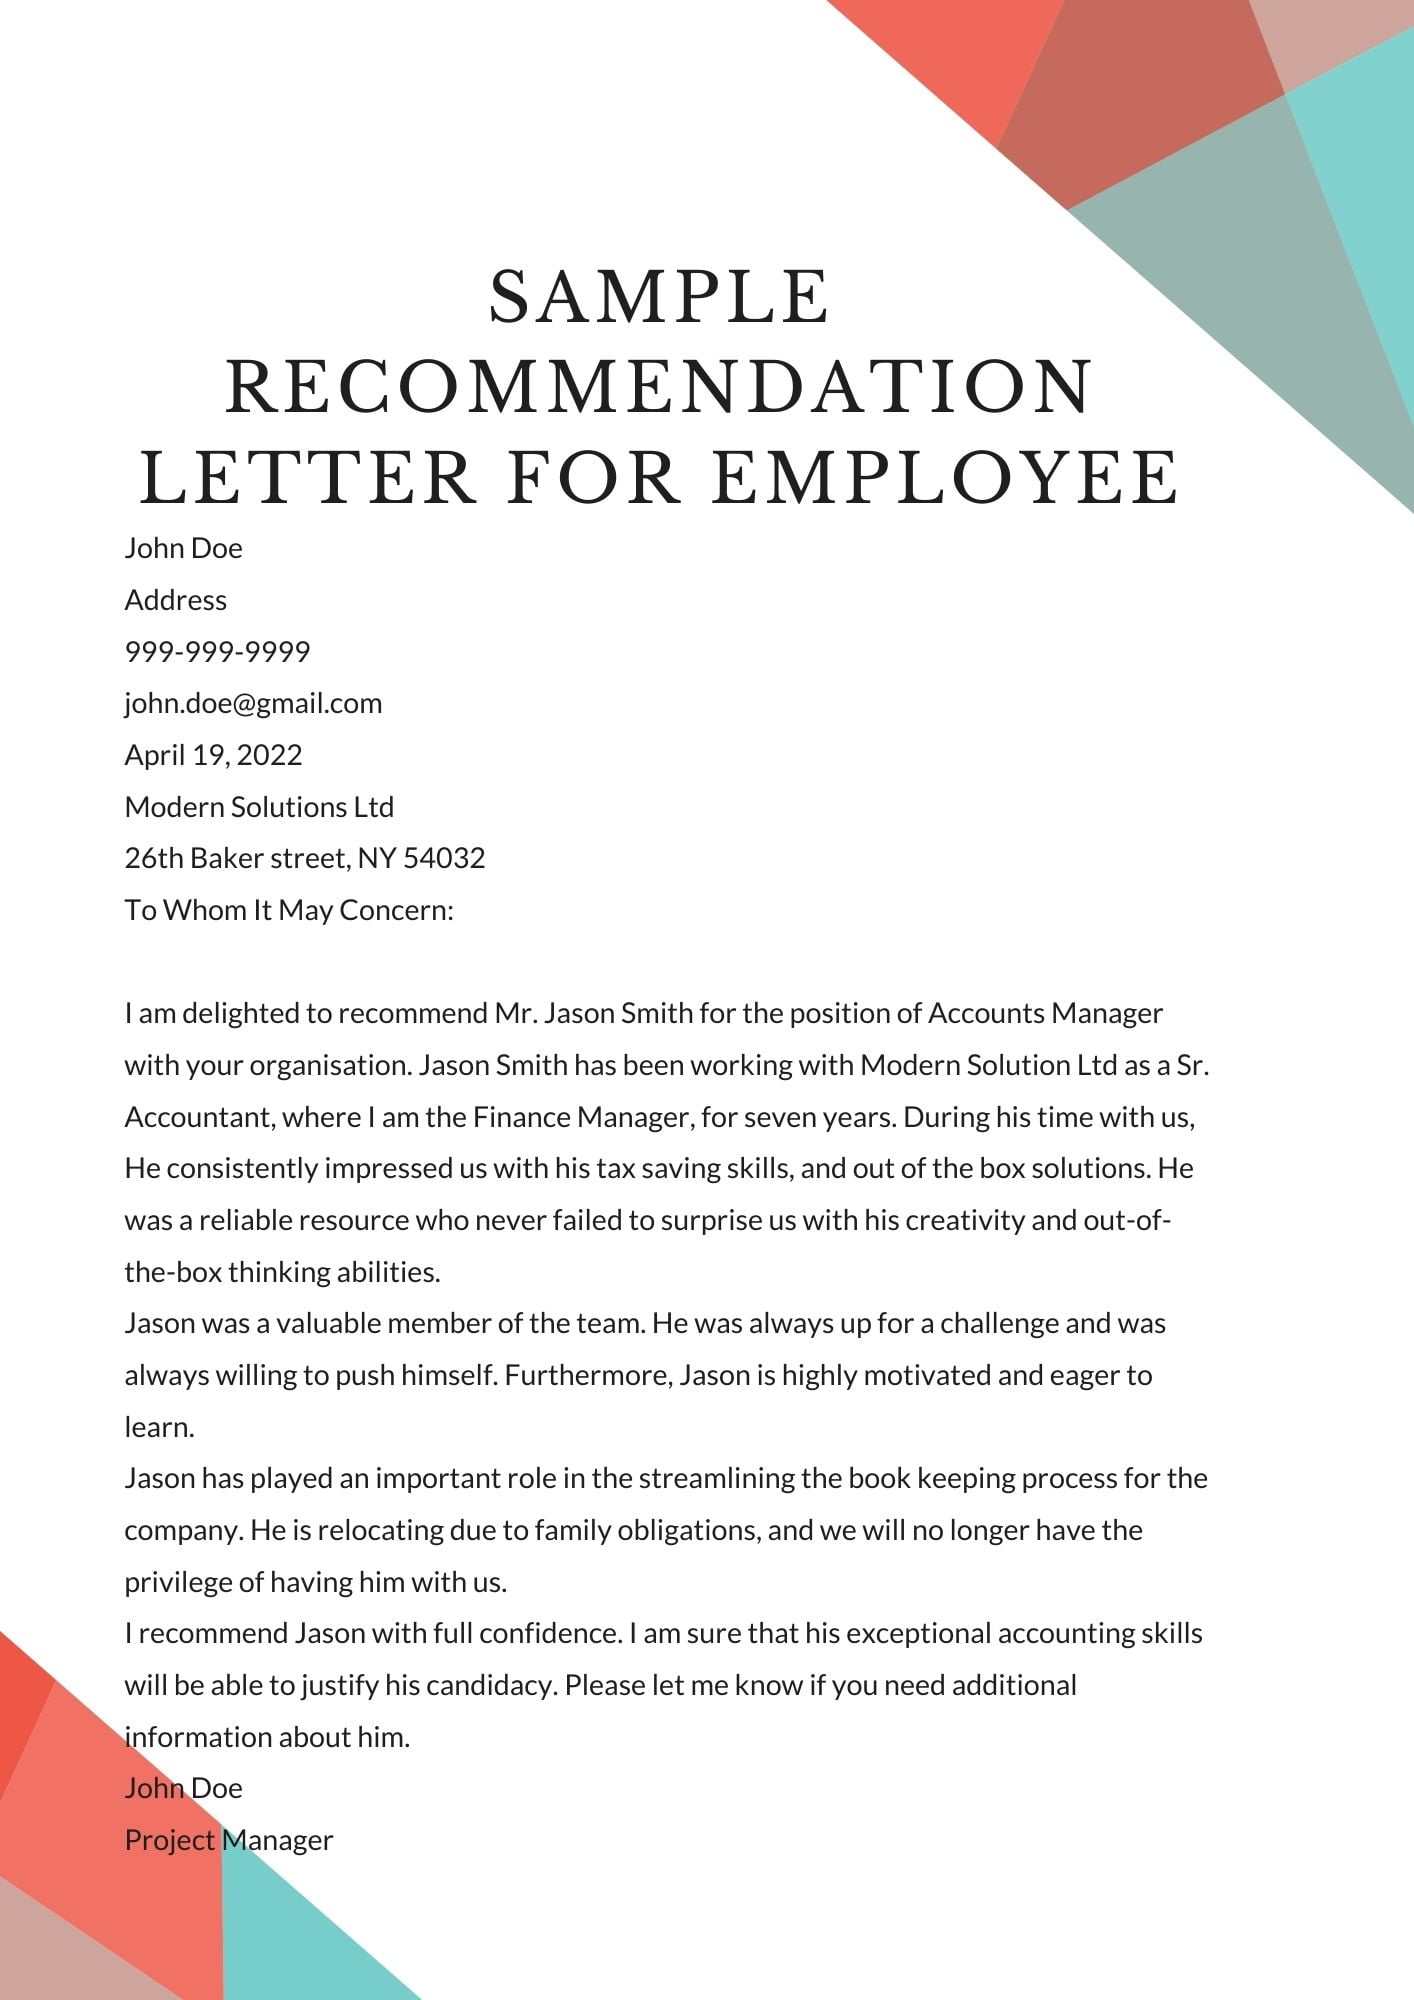 write a letter of recommendation for an employee